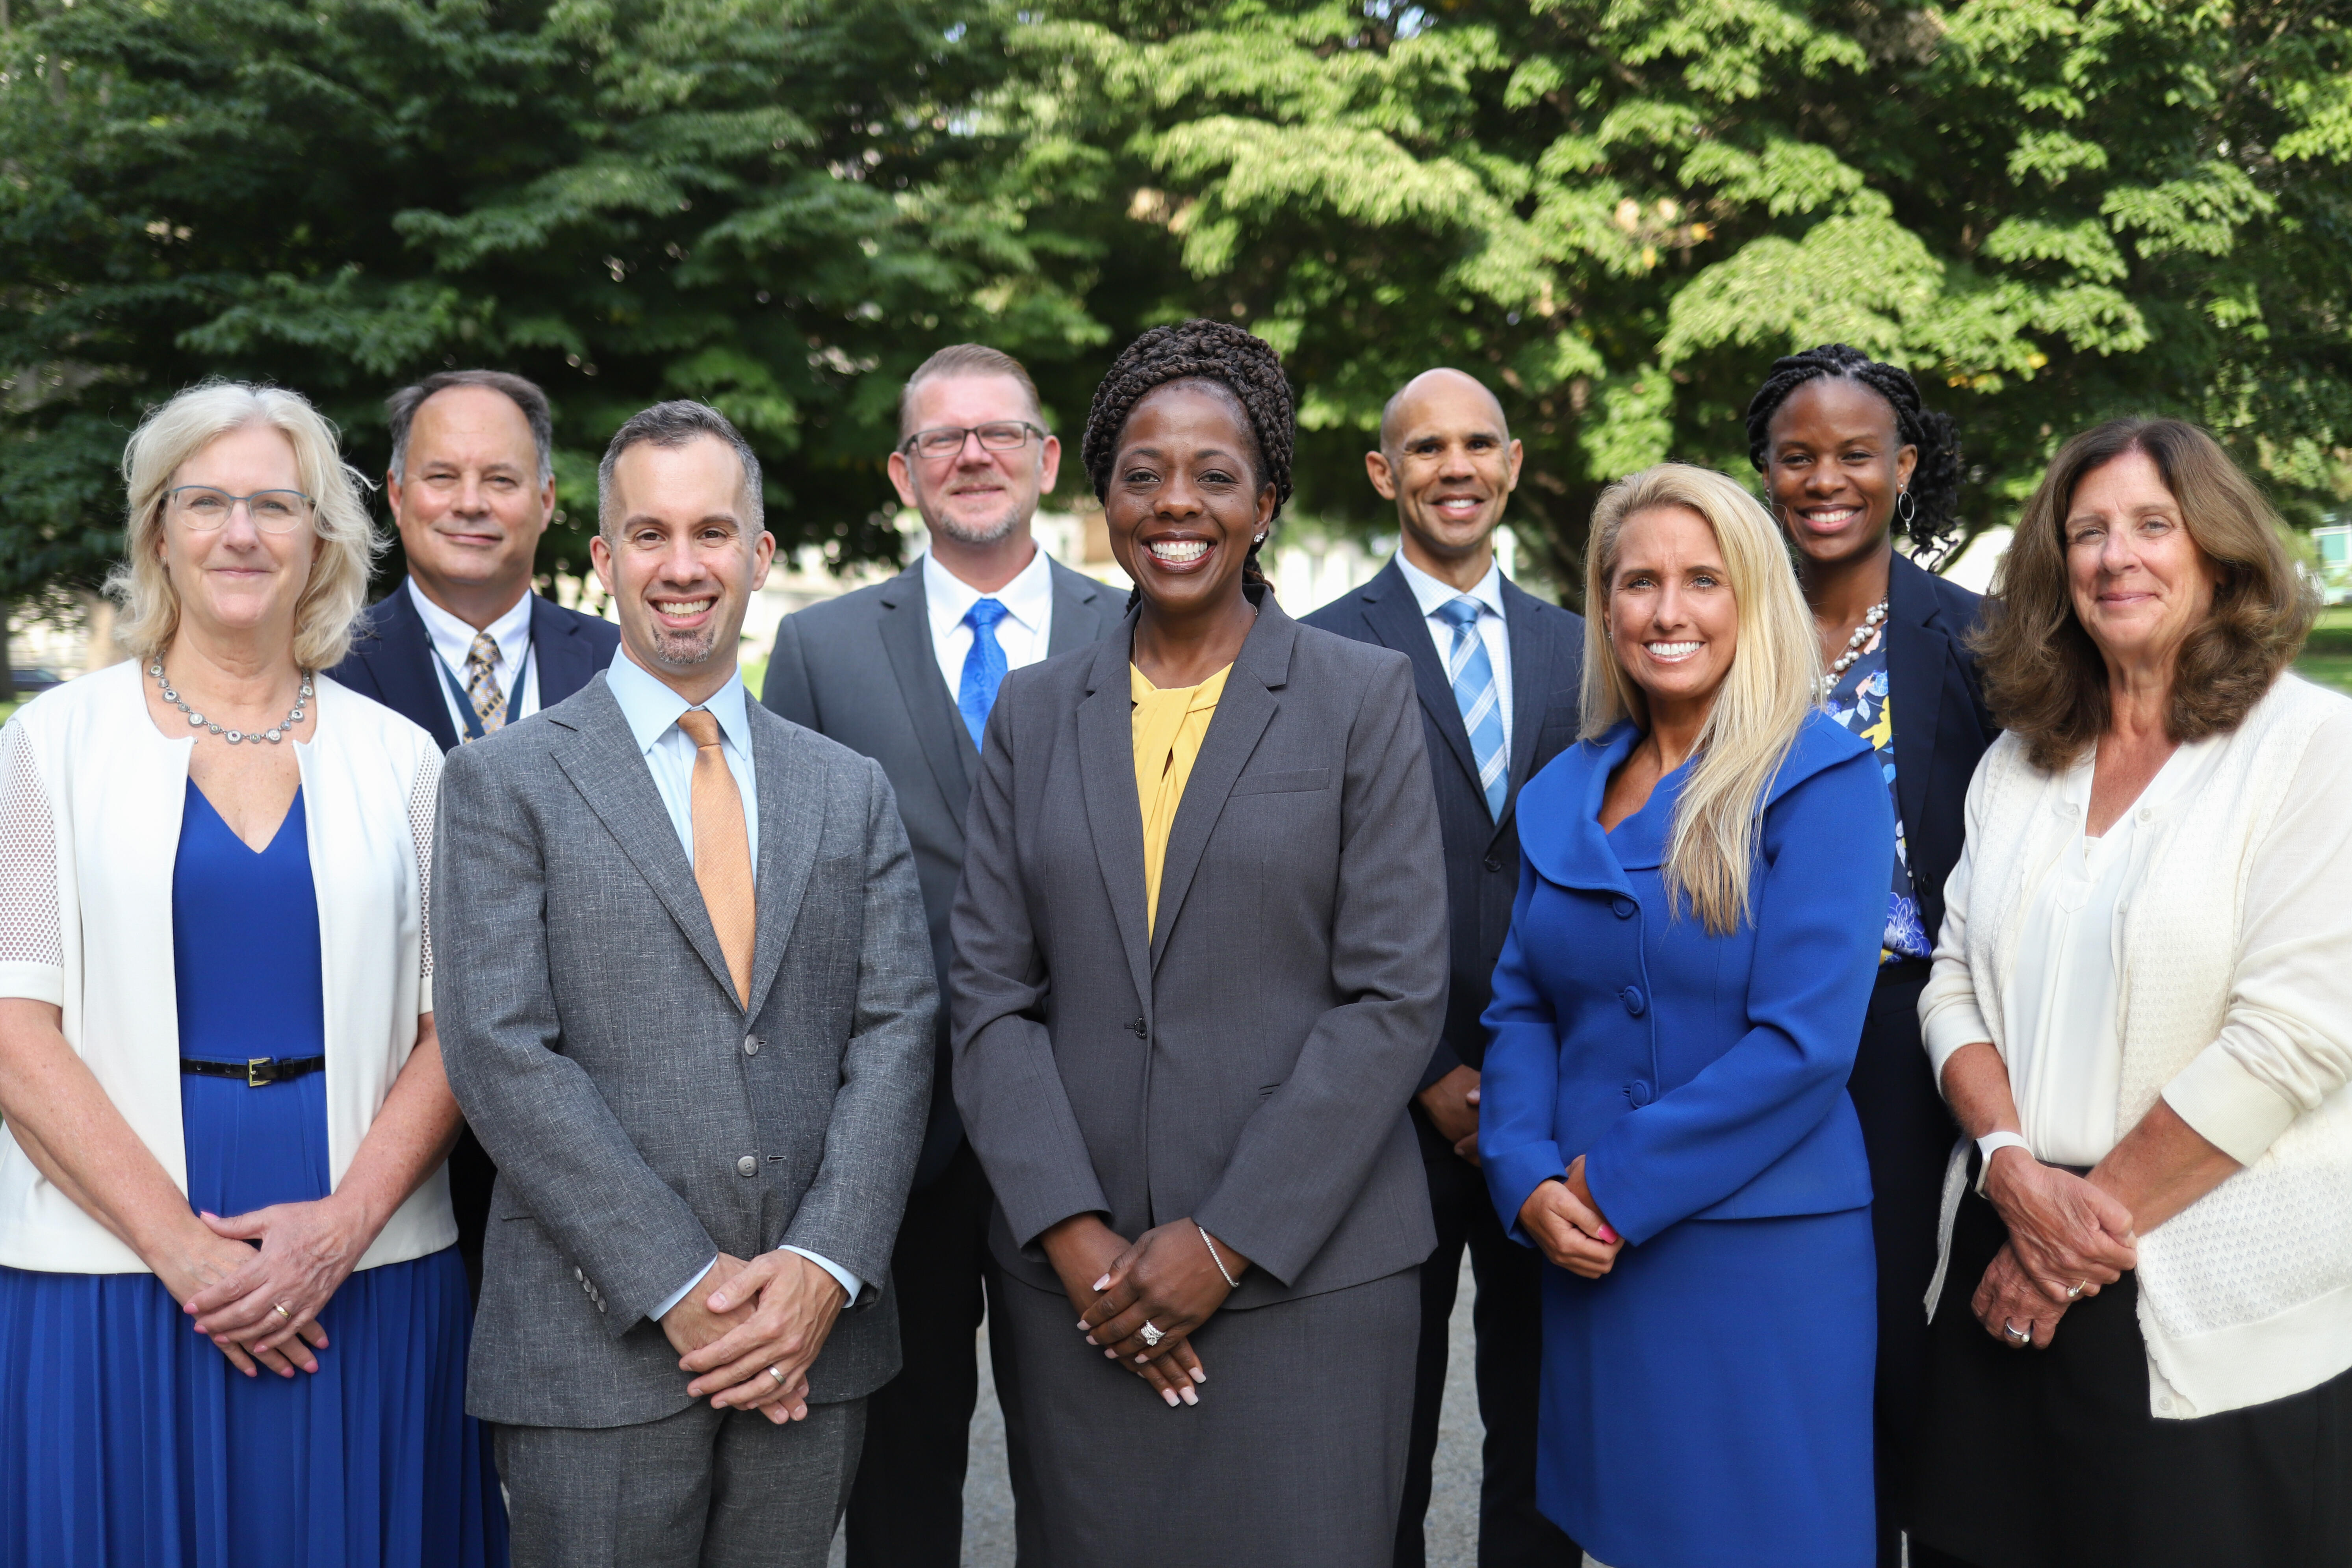 City School District of Albany superintendent and cabinet.